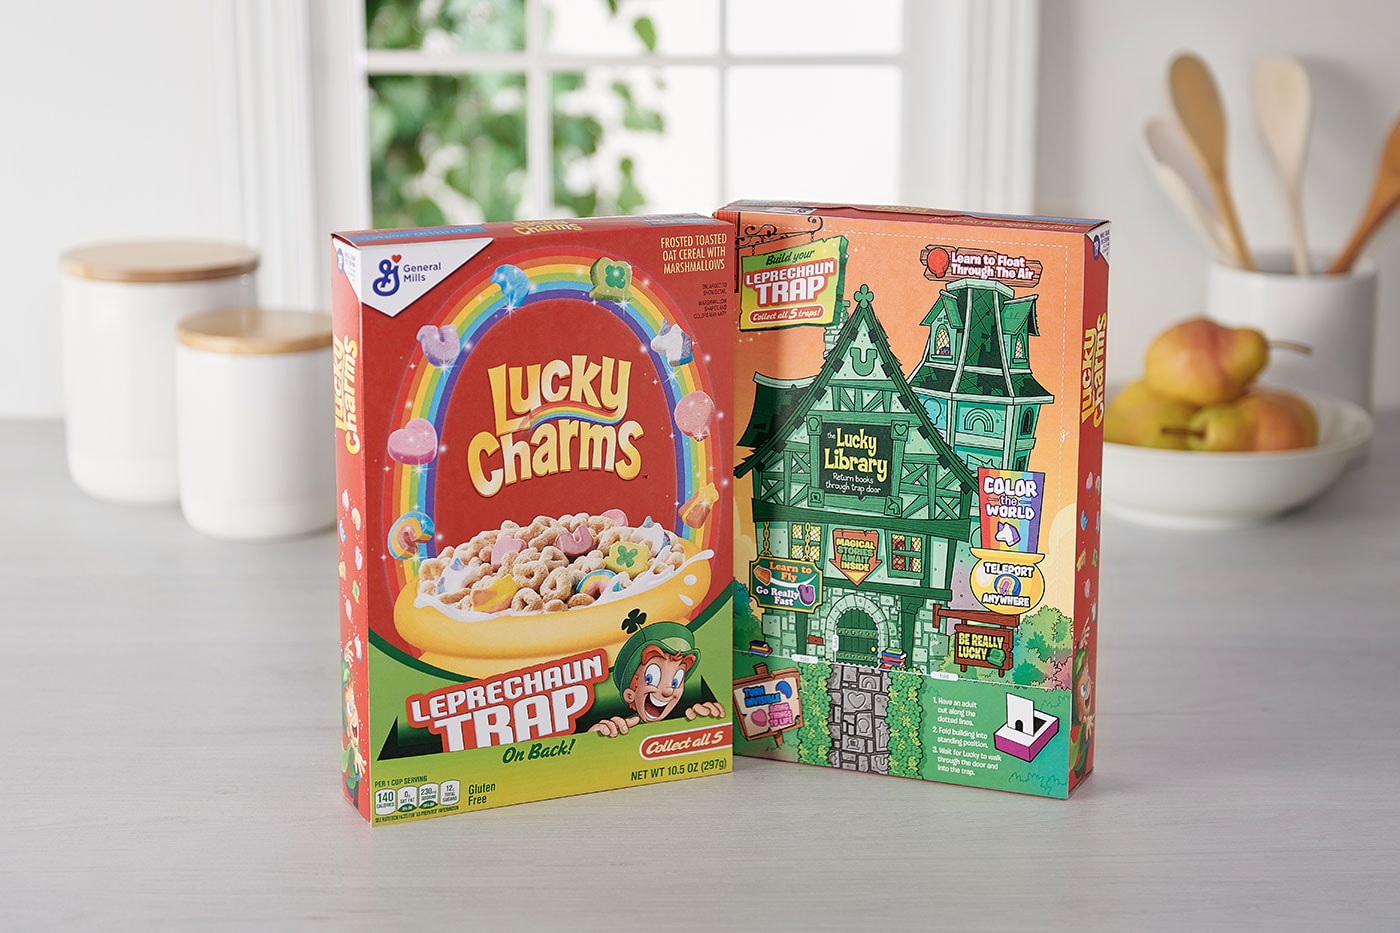 Lucky Charms debuts 'marshmallow-revealing technology